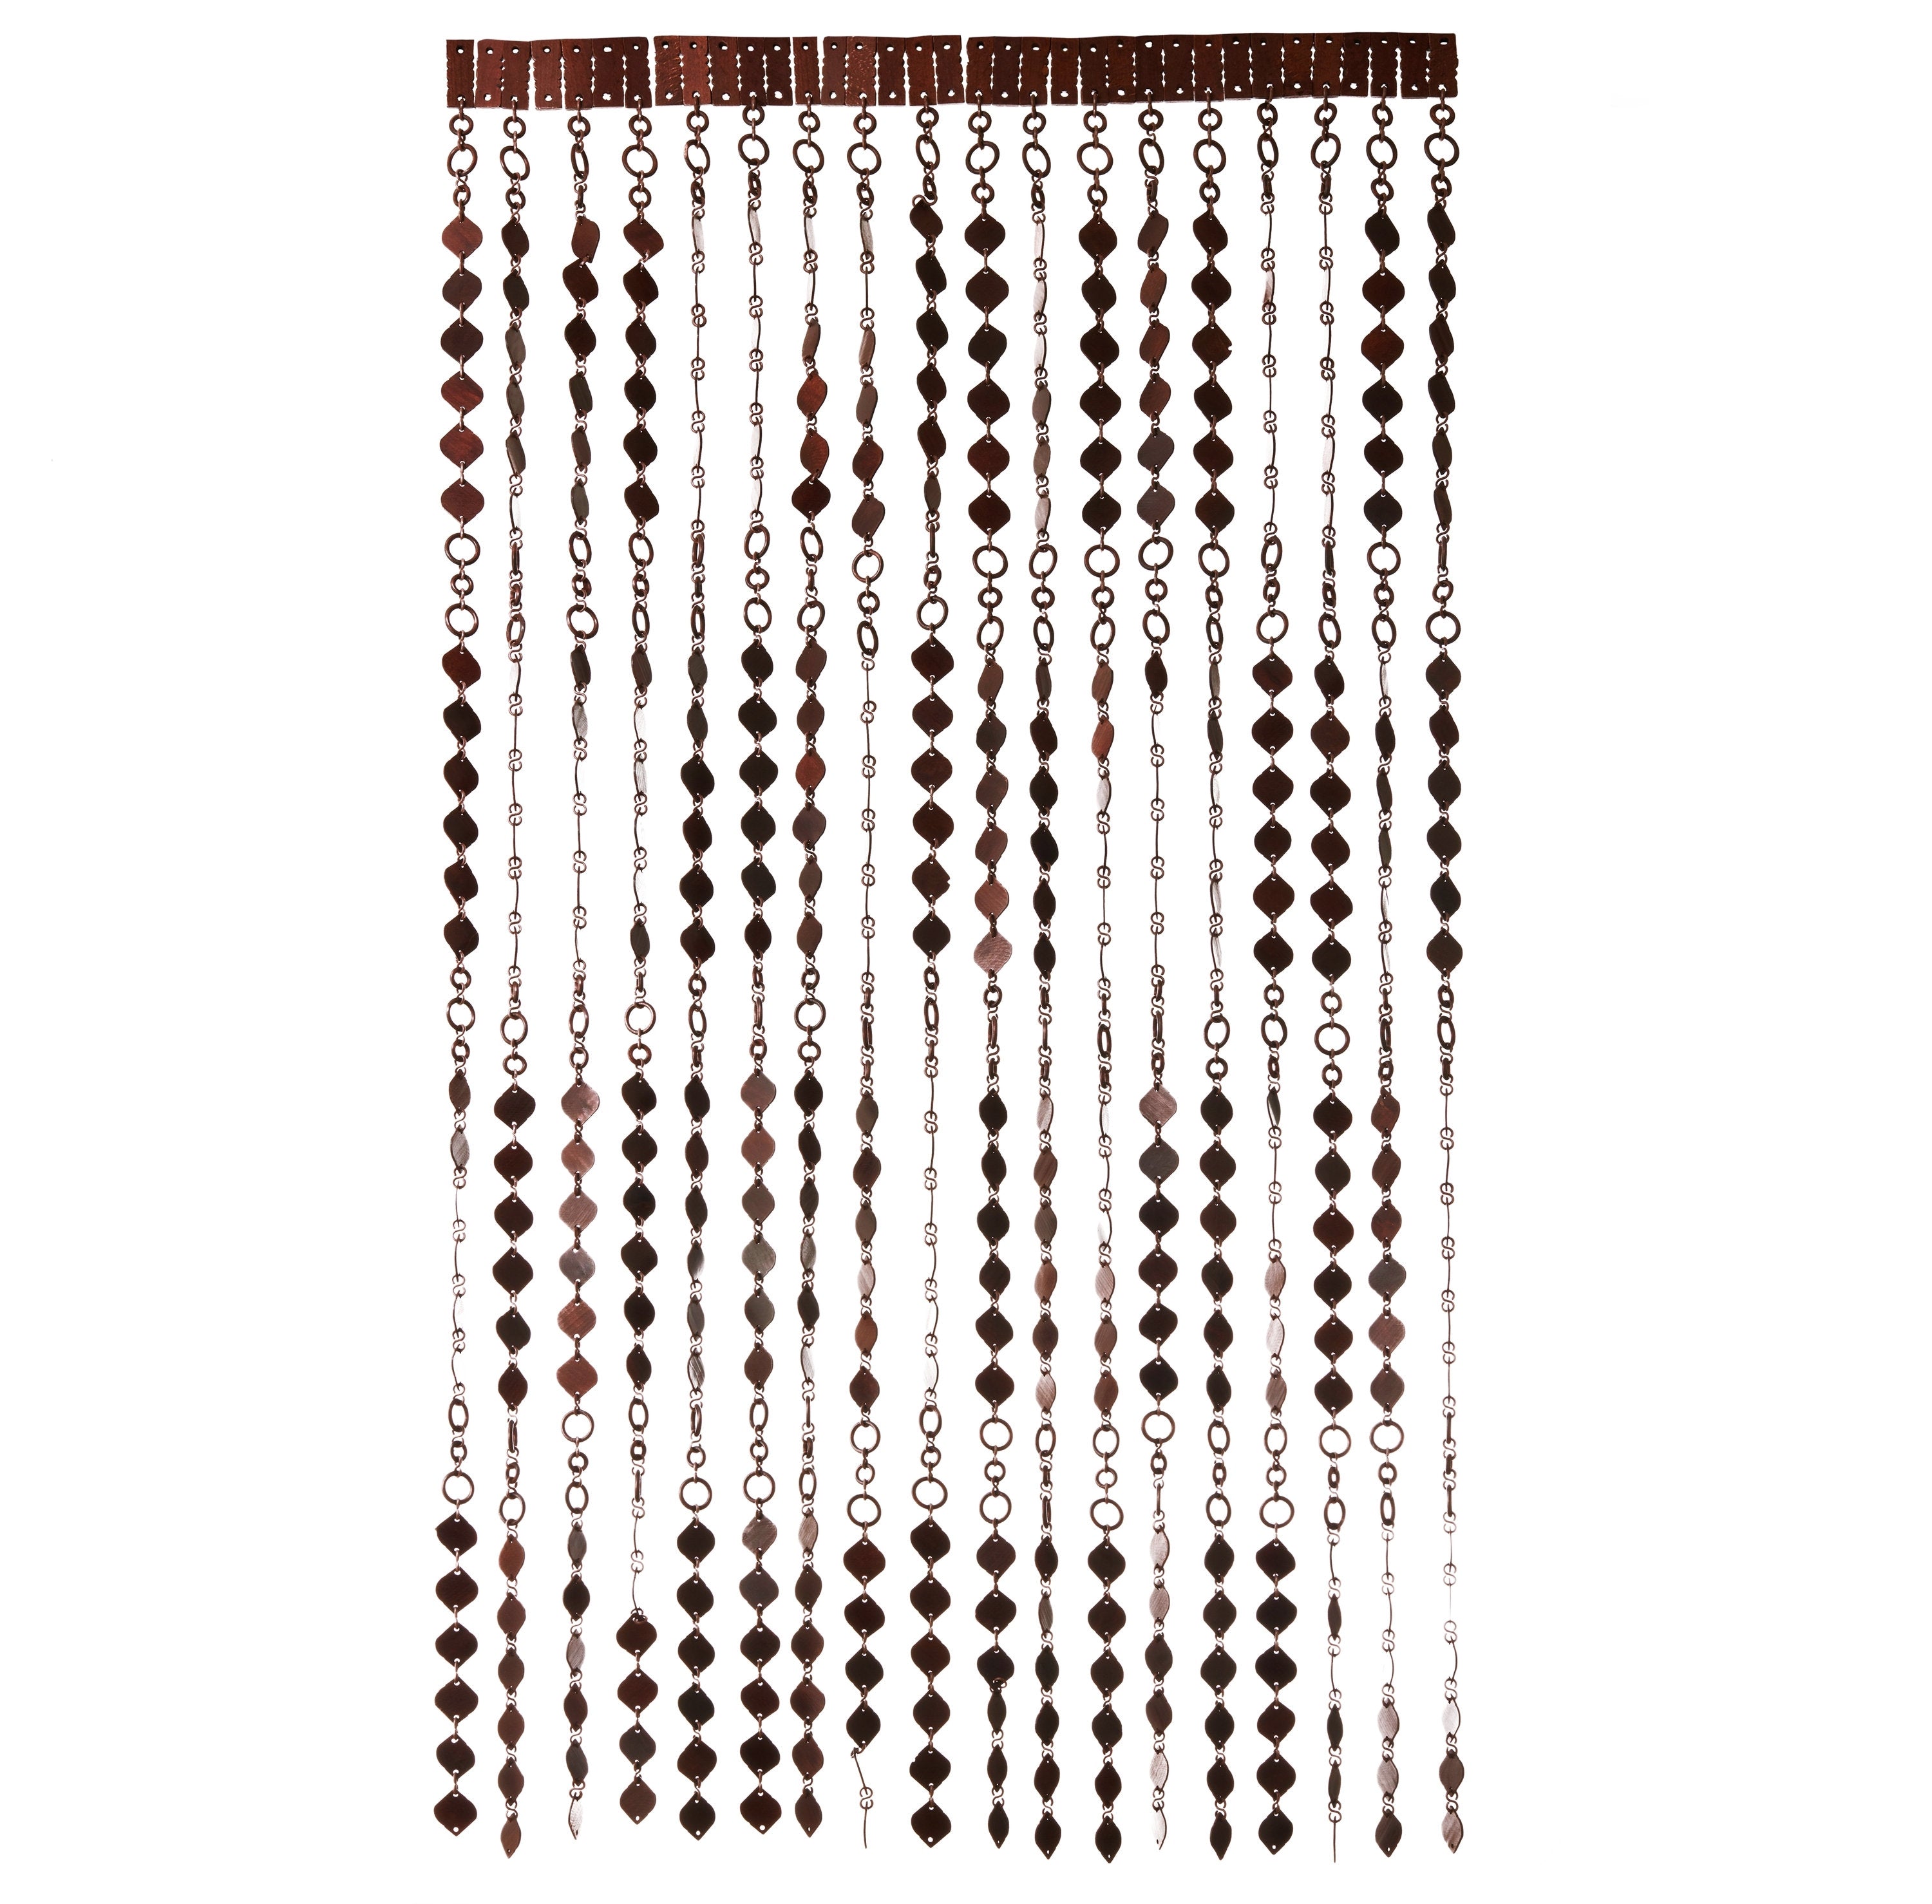 Door Curtain Screen From Wooden Beads. Hanging Handmade Beaded Door Blinds - Size 90 x 200 cm - Easy To Resize And Install